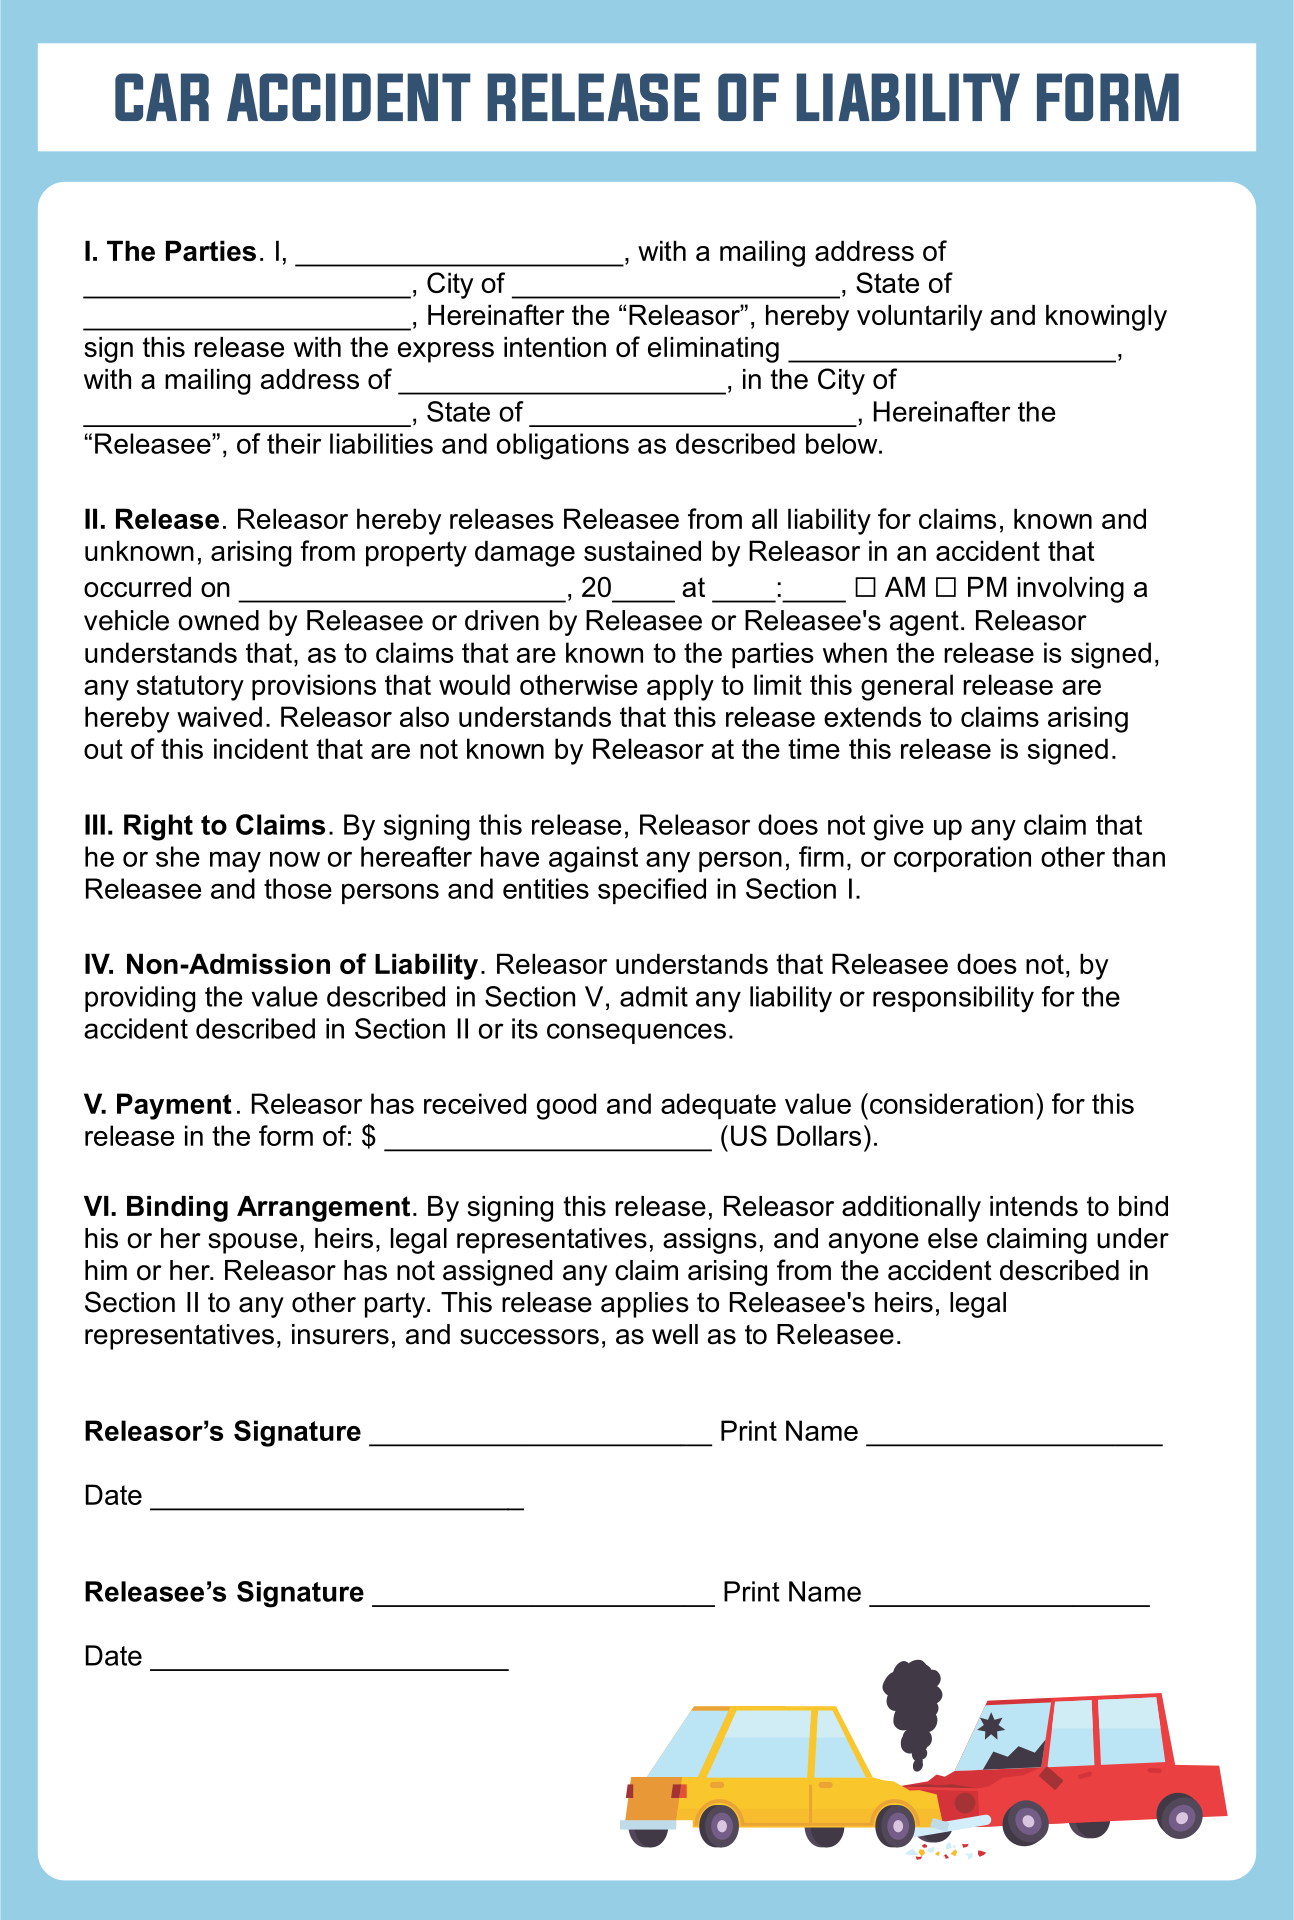 Car Accident Liability Release Form Template